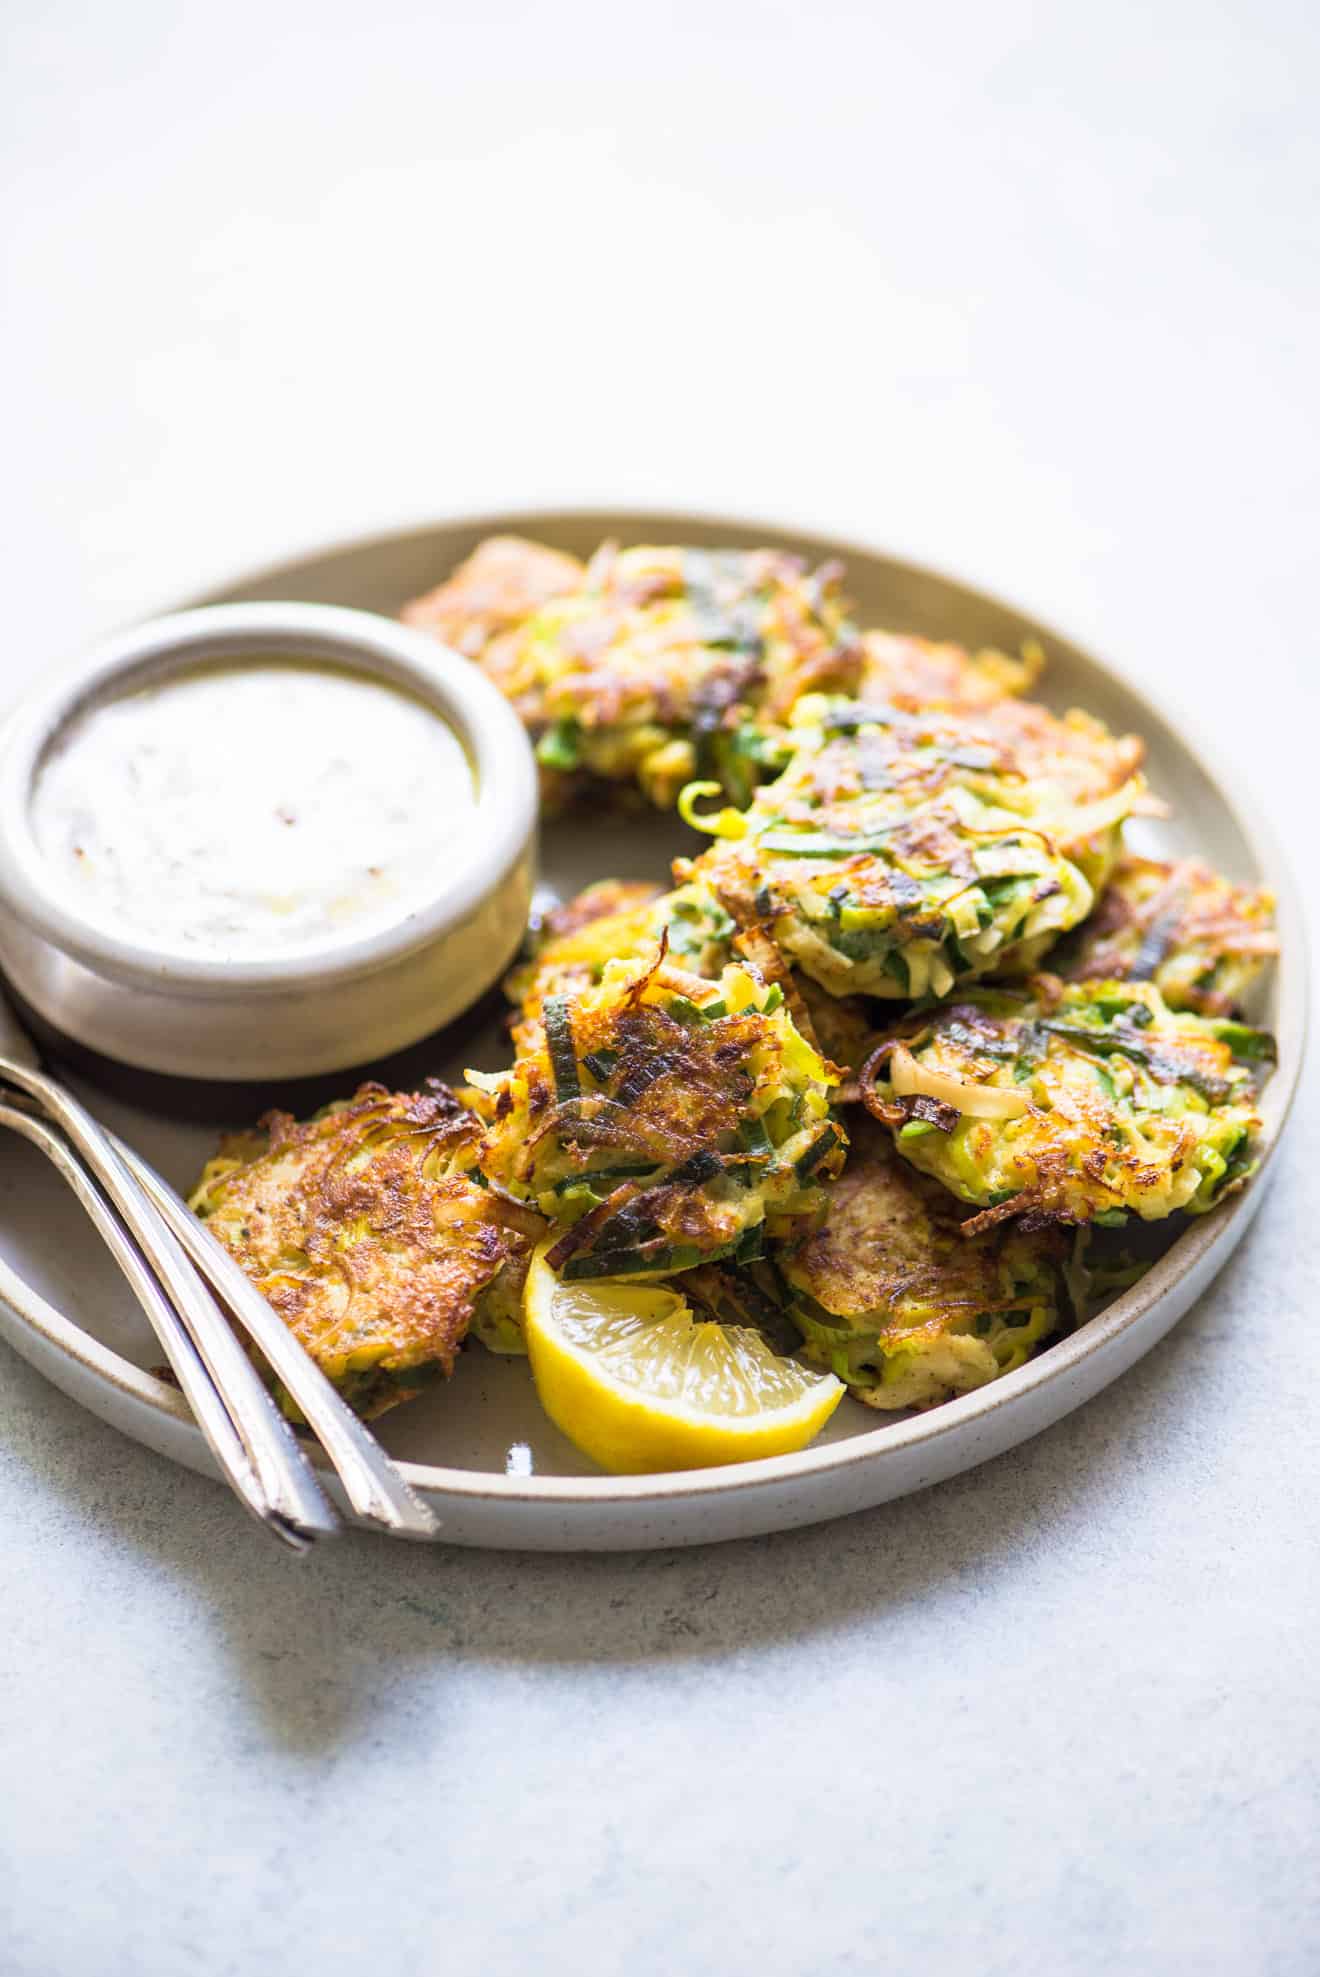 Leek and Kohlrabi Fritters with Sumac Yogurt - simple fritters that are great for an appetizer!